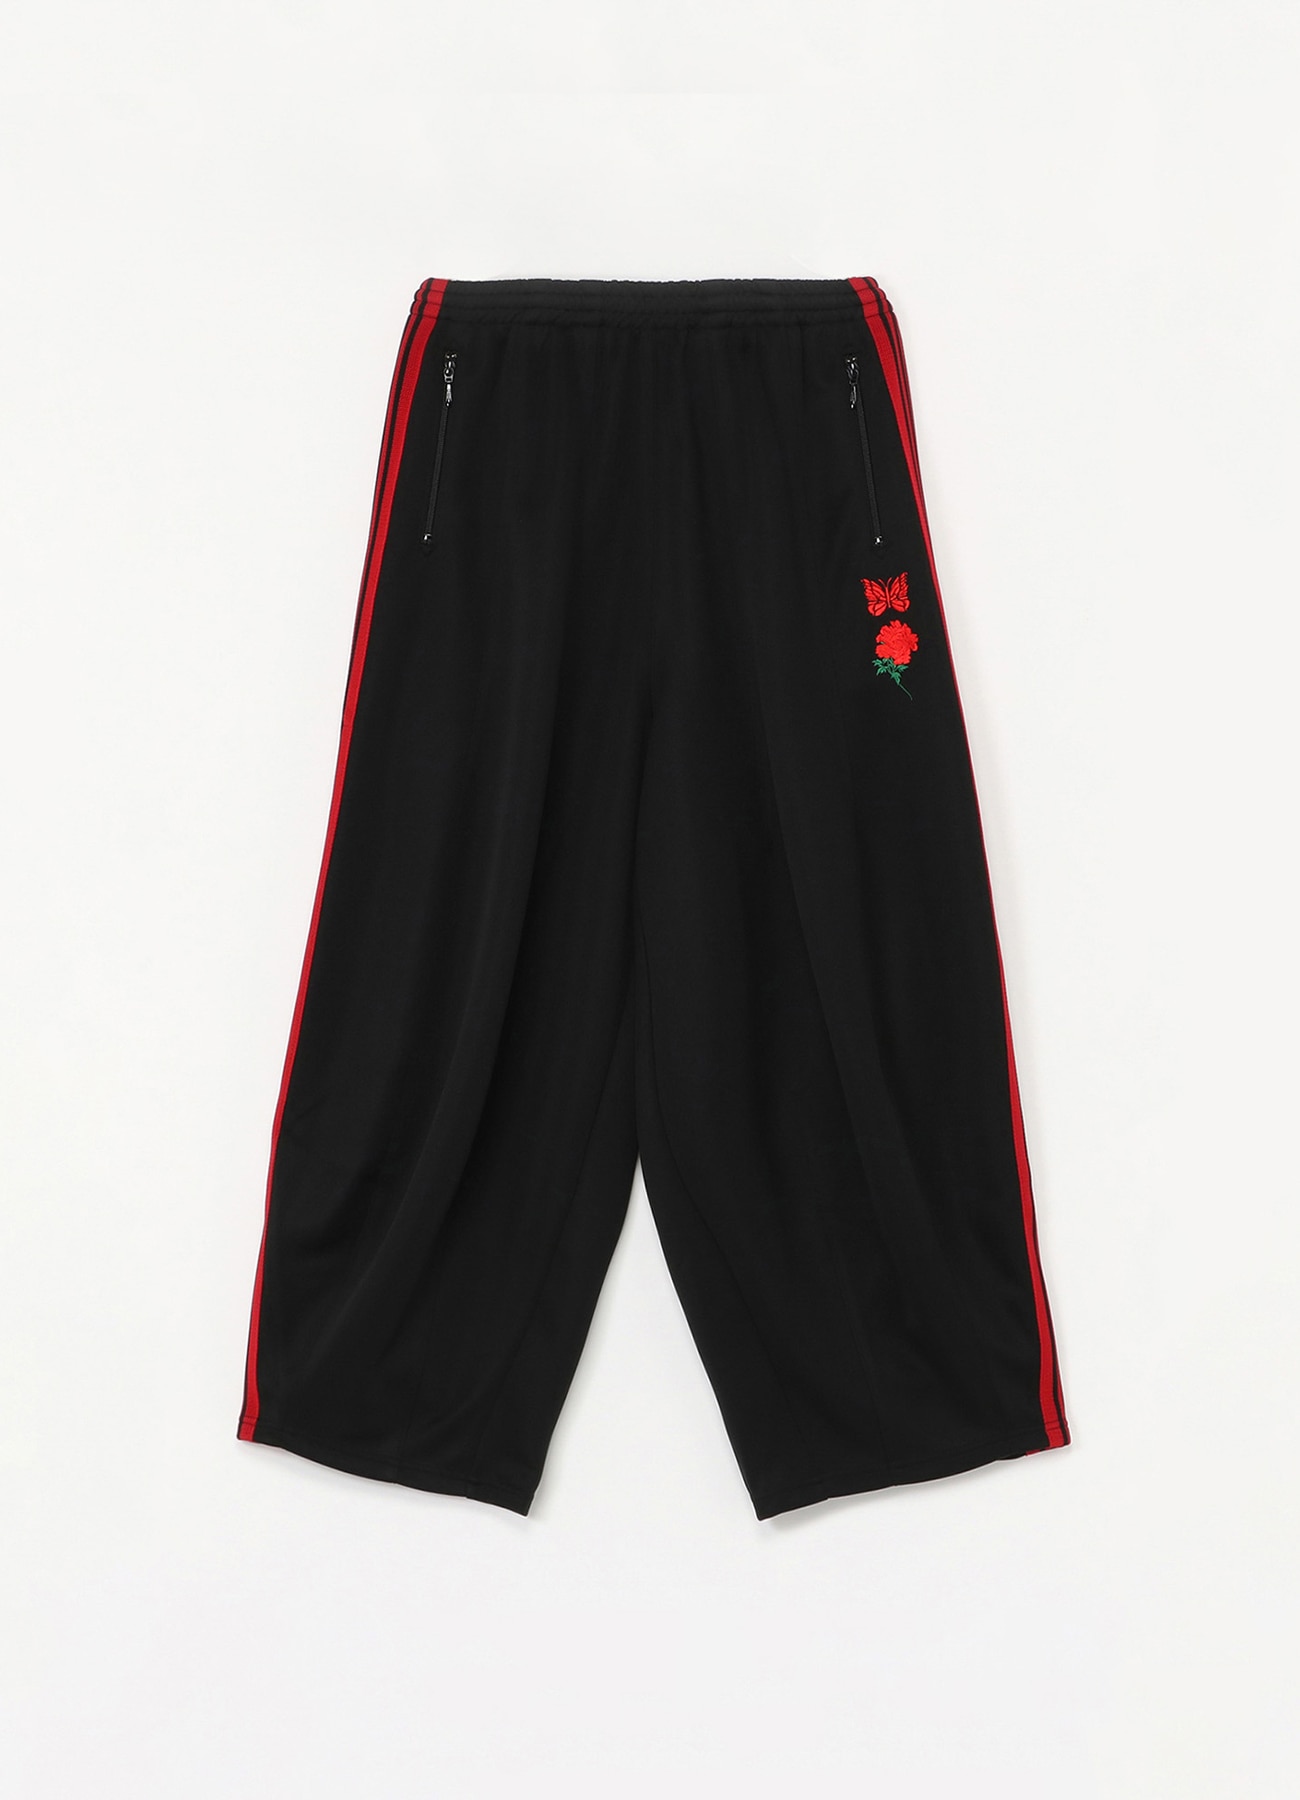 WILDSIDE x NEEDLES HD Track Pant (XS REDxBLACK): NEPENTHES